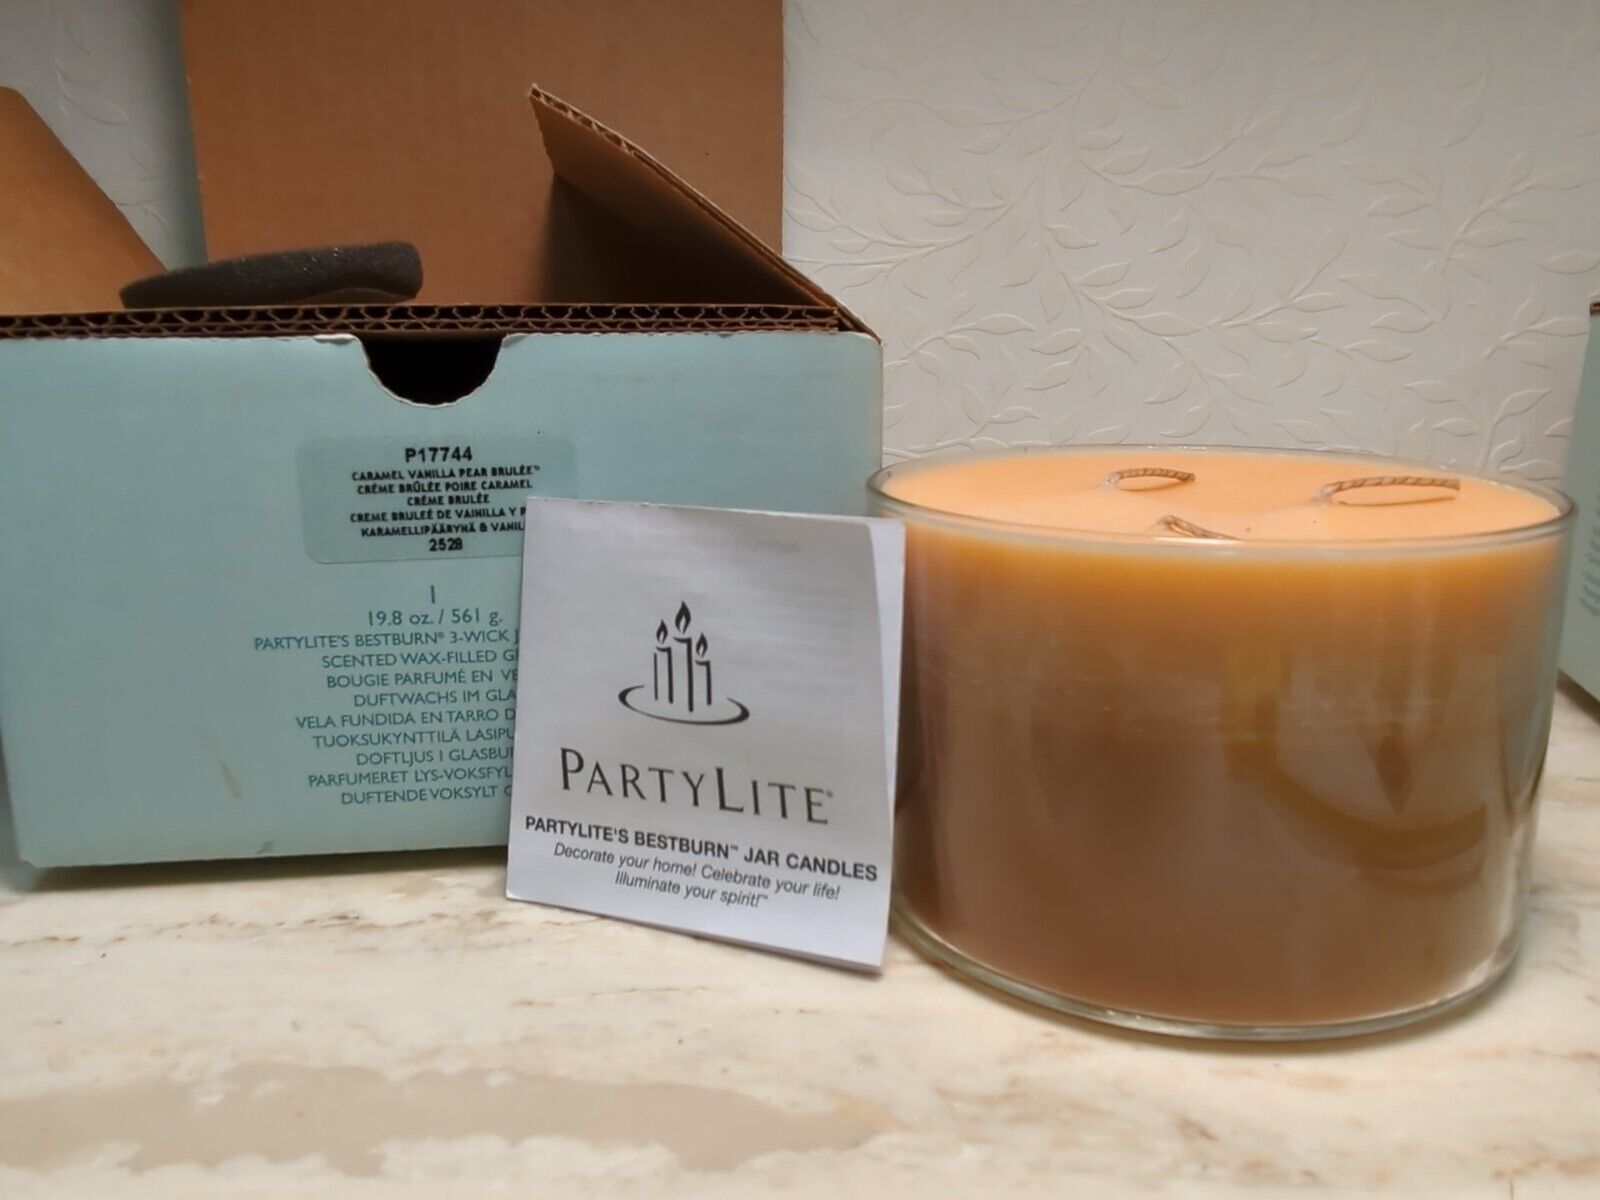 New PartyLite 3-Wick Jar Candle Best Burn 19.8 Caramel Vanilla Pear Brulee Glass